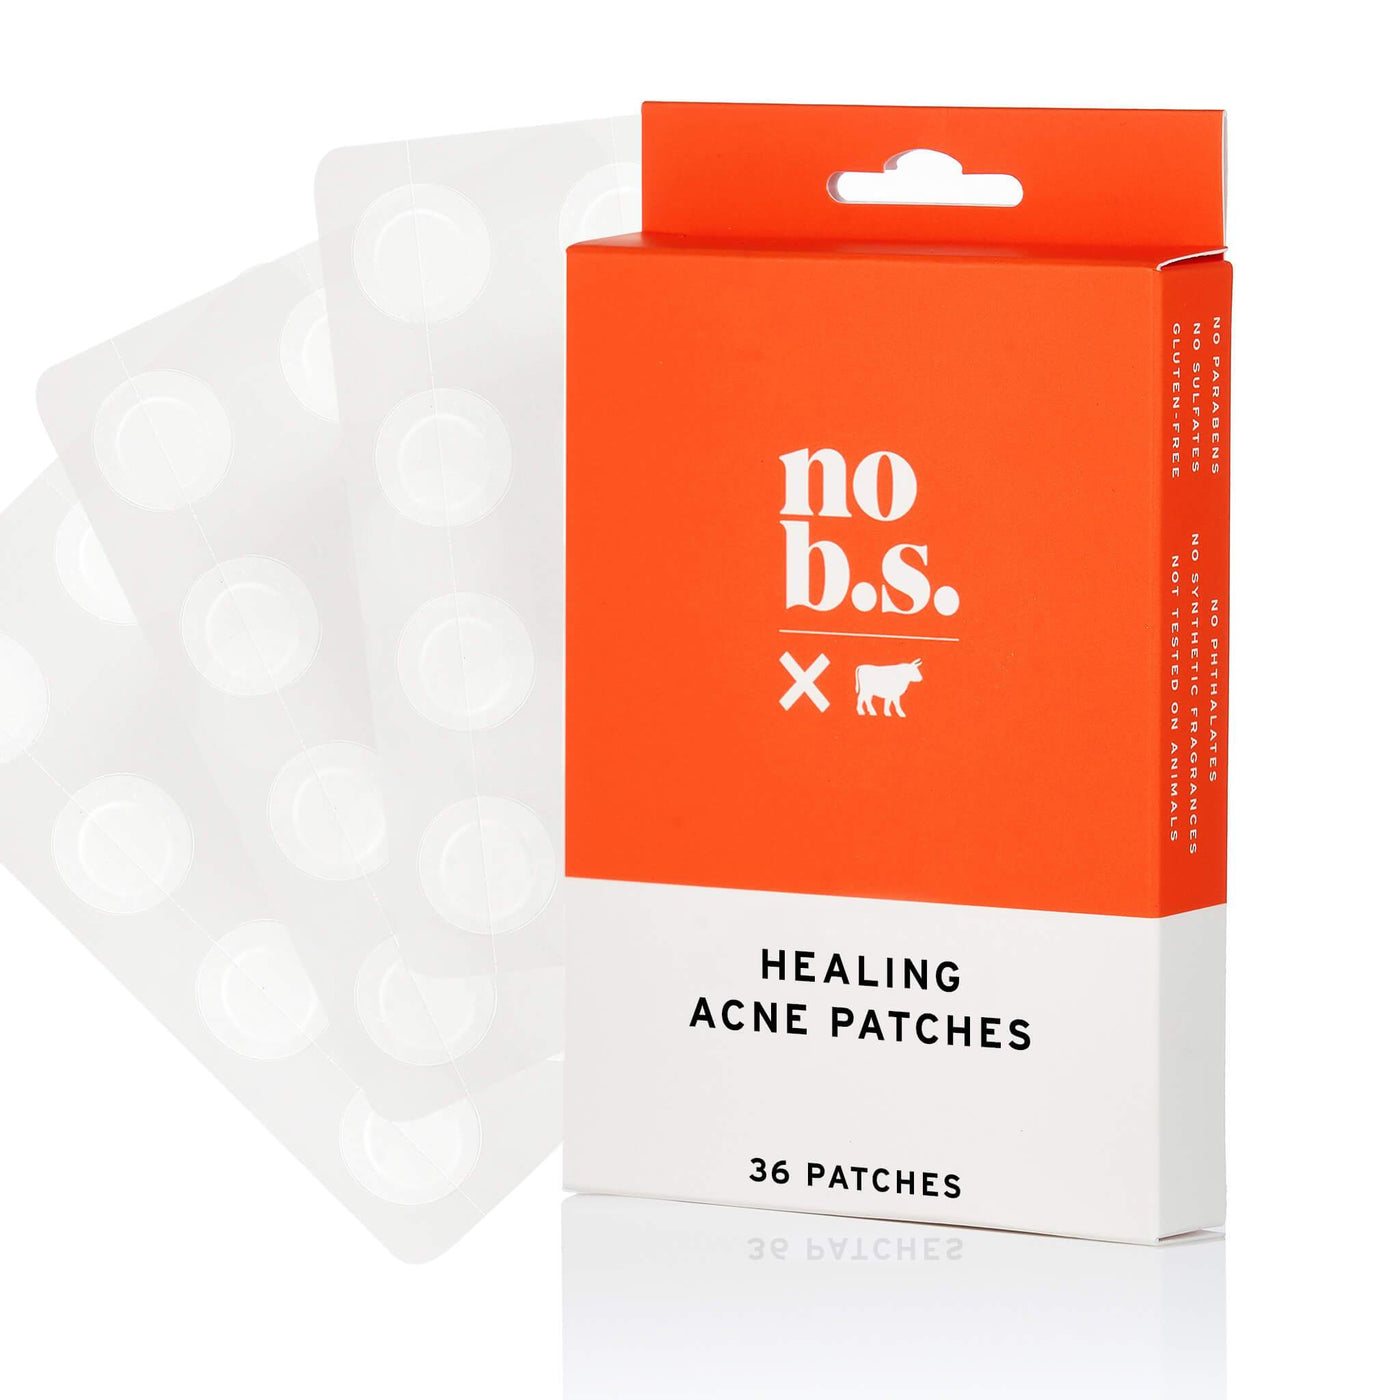 TRIAL KIT: 5 deluxe minis for home try-on + 1 box 36 count acne patches + $8 gift card